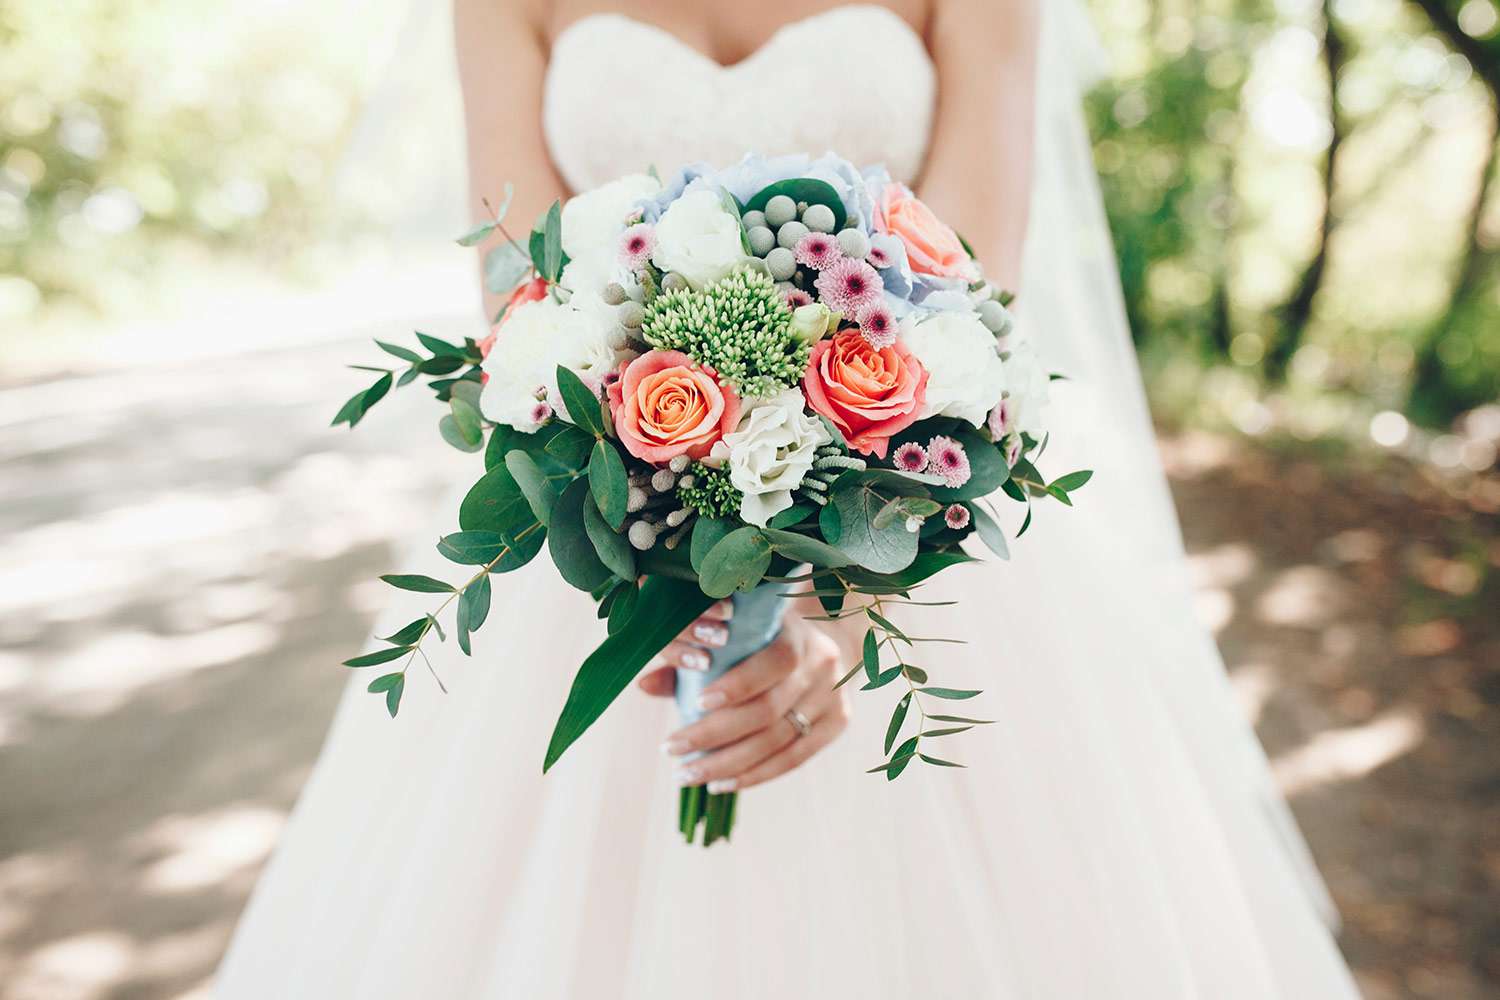 Most Popular Wedding Flower Arrangements And Trends Of 2018 Real Simple